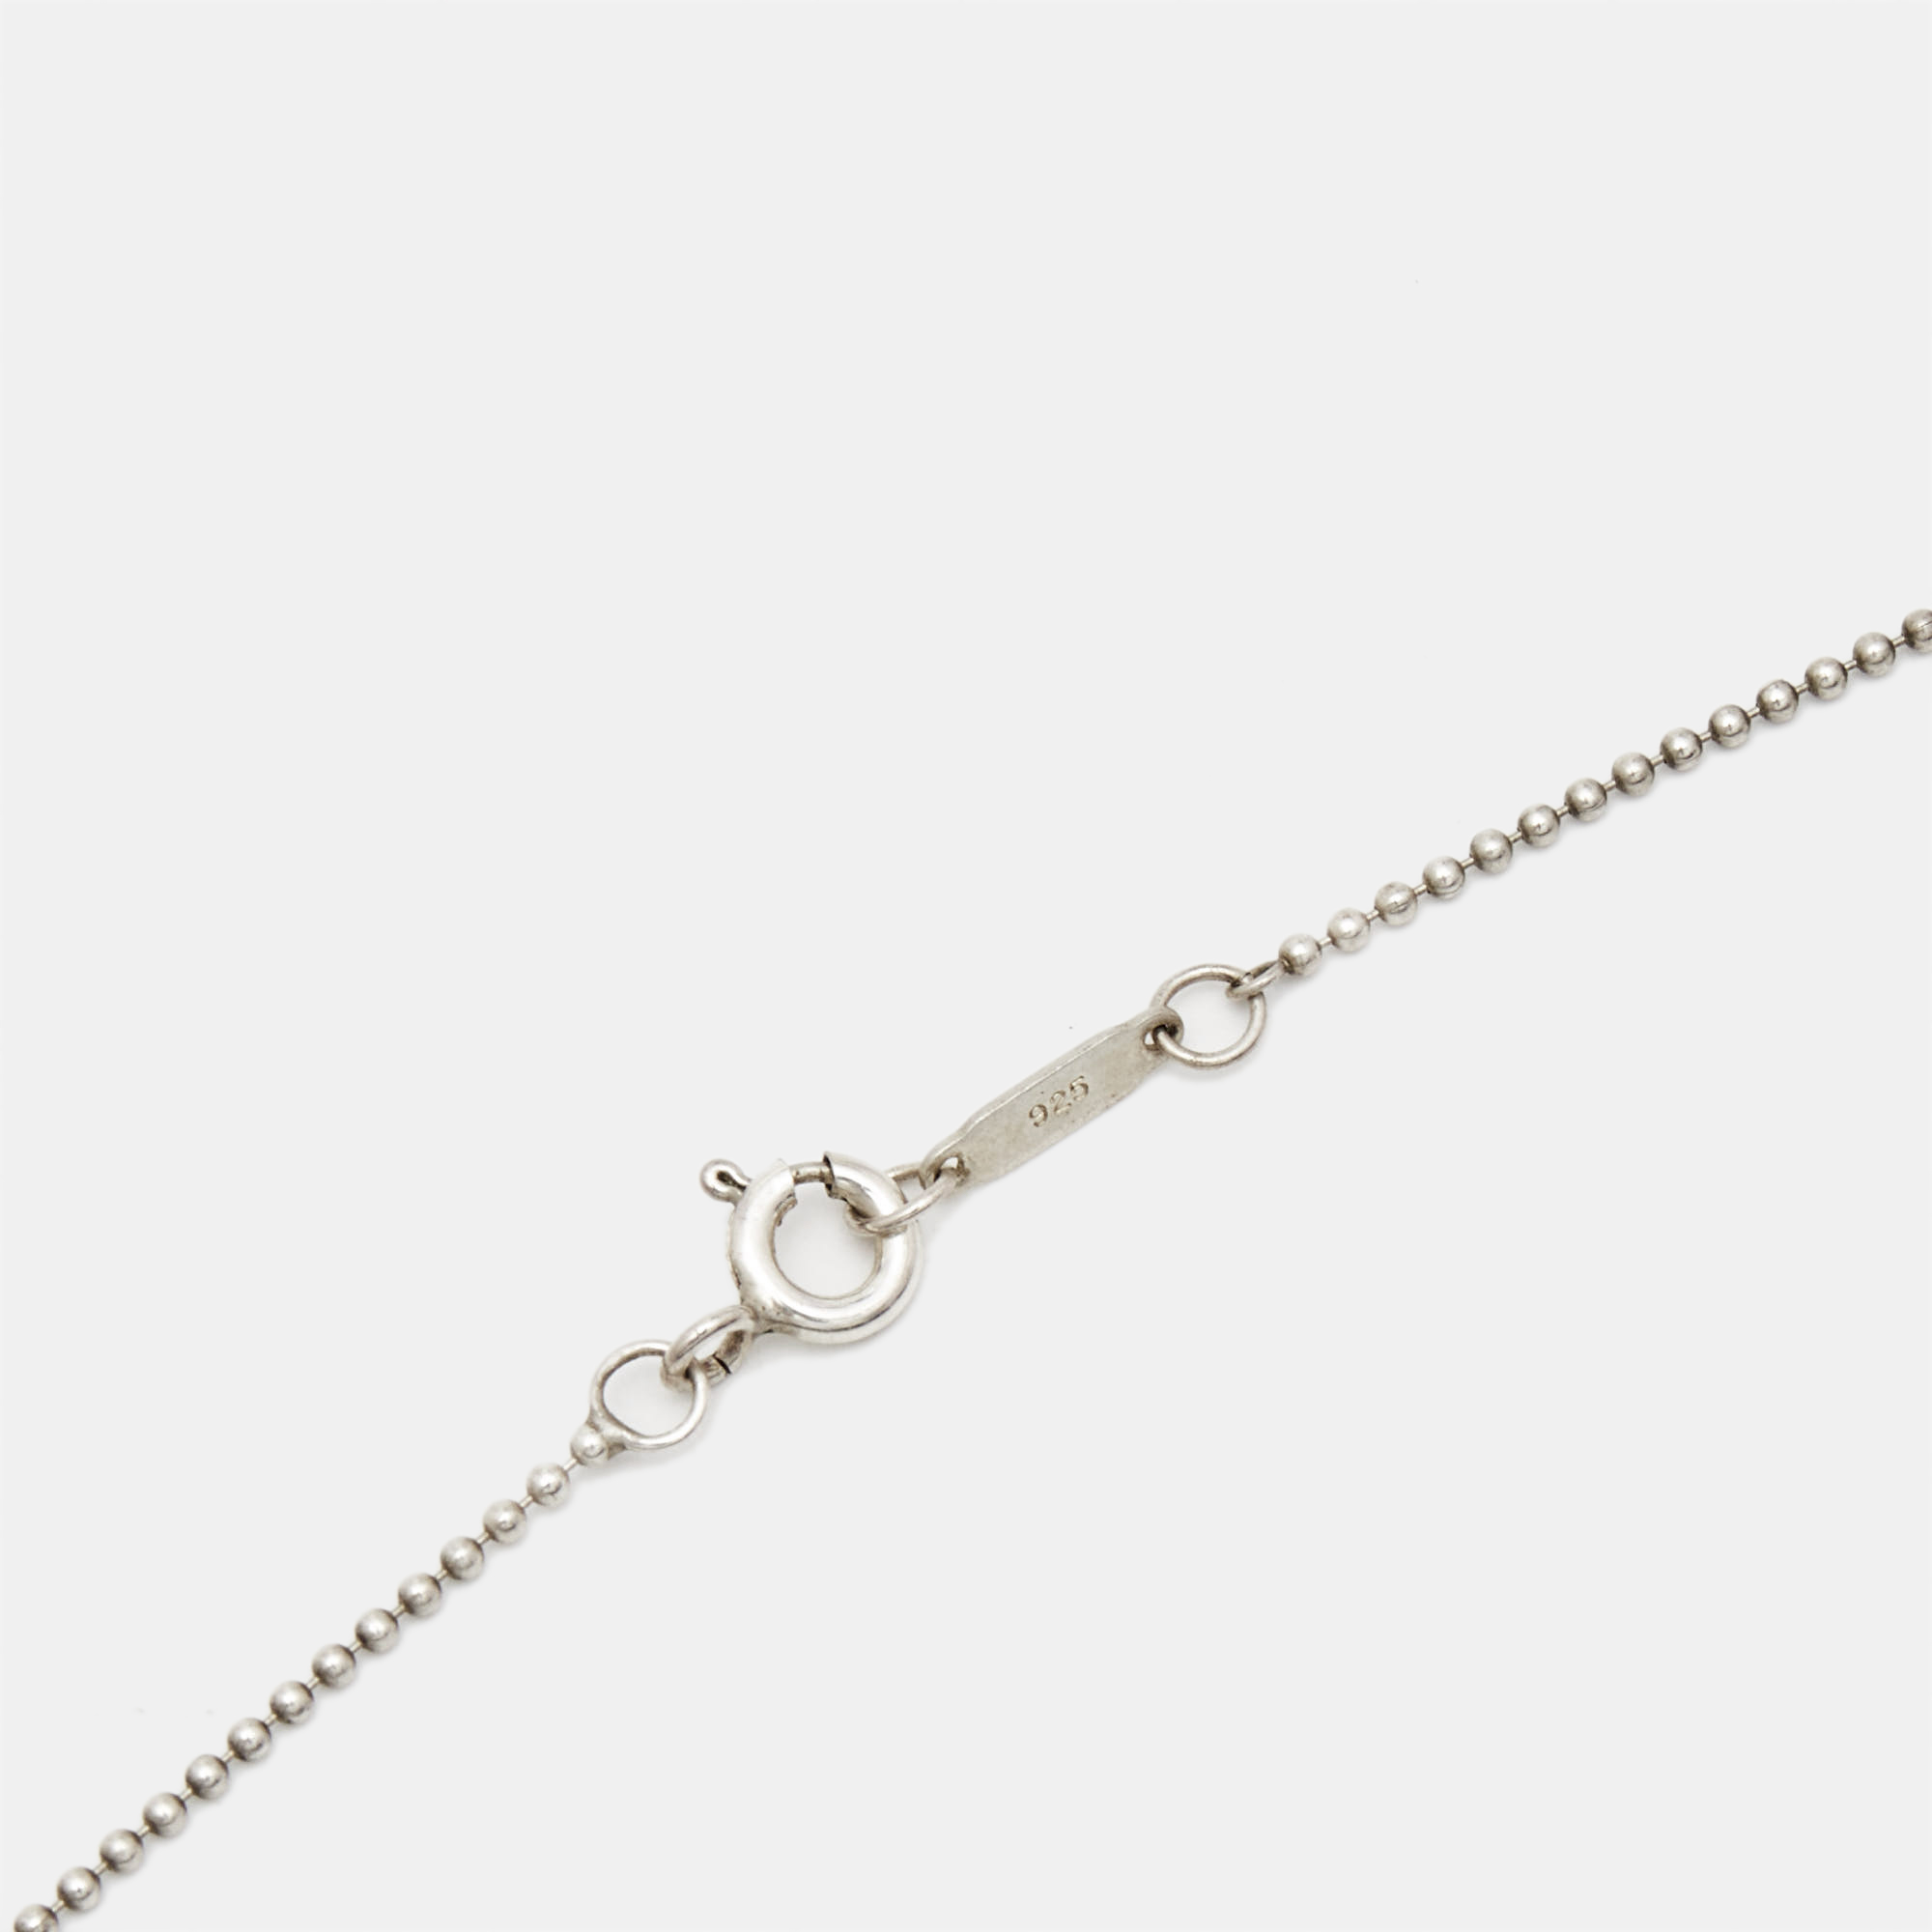 Tiffany & Co. Crown Key Sterling Silver Pendant Necklace